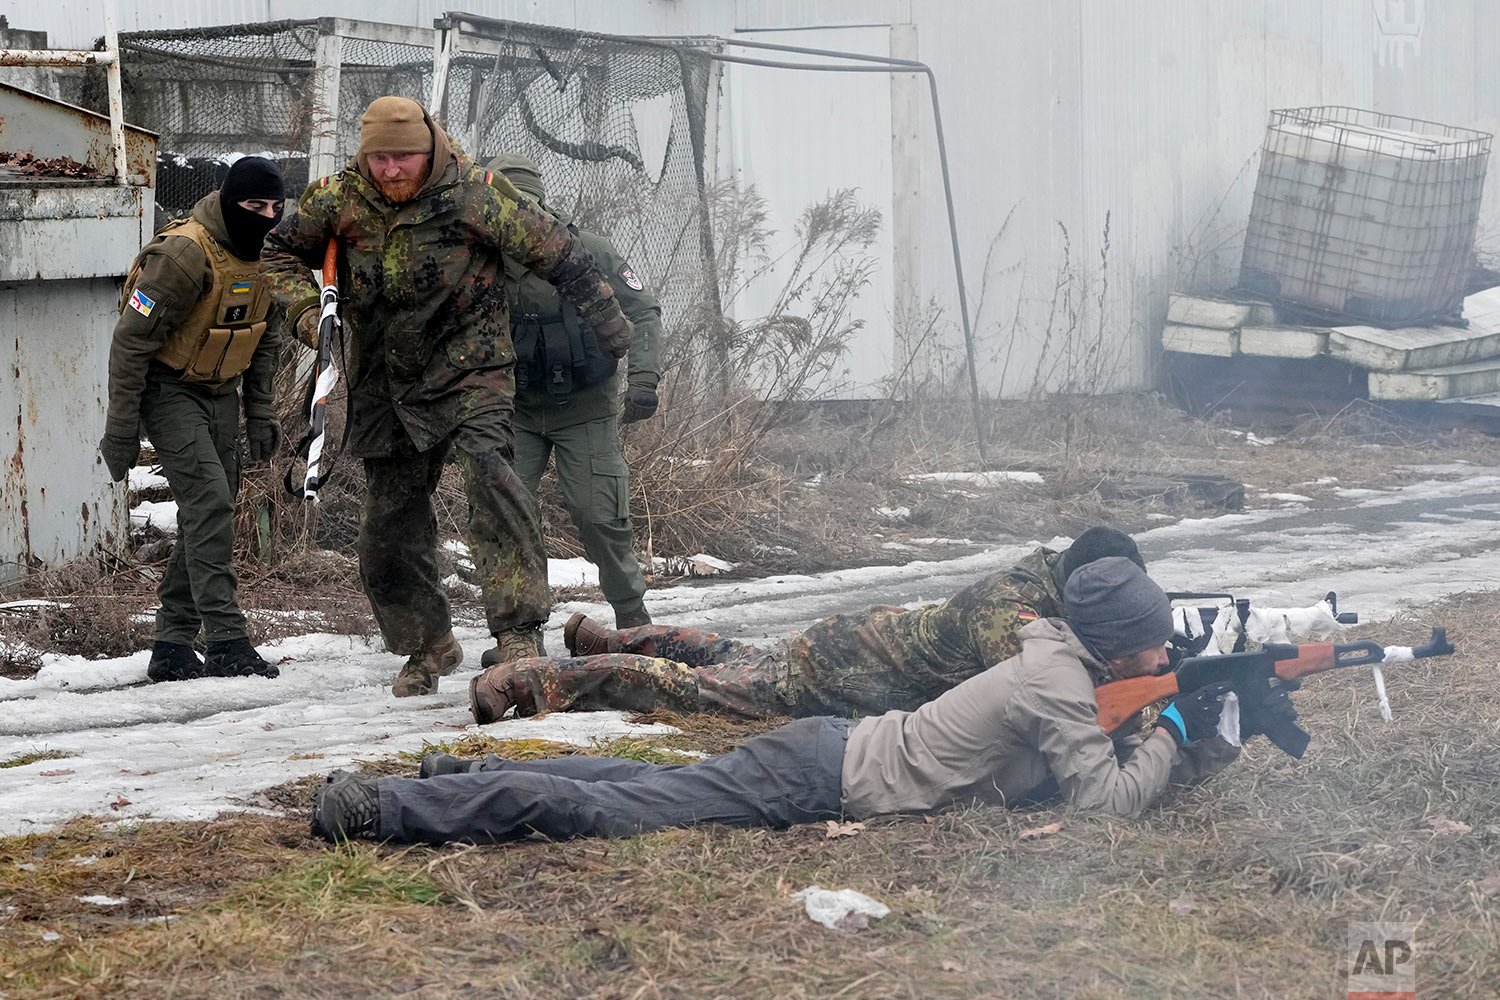  An instructor, second left, runs during a training for civilians and members of the Georgian Legion, a paramilitary unit formed mainly by ethnic Georgian volunteers to fight against Russian forces in Ukraine in 2014, in Kyiv, Ukraine, Saturday, Feb.